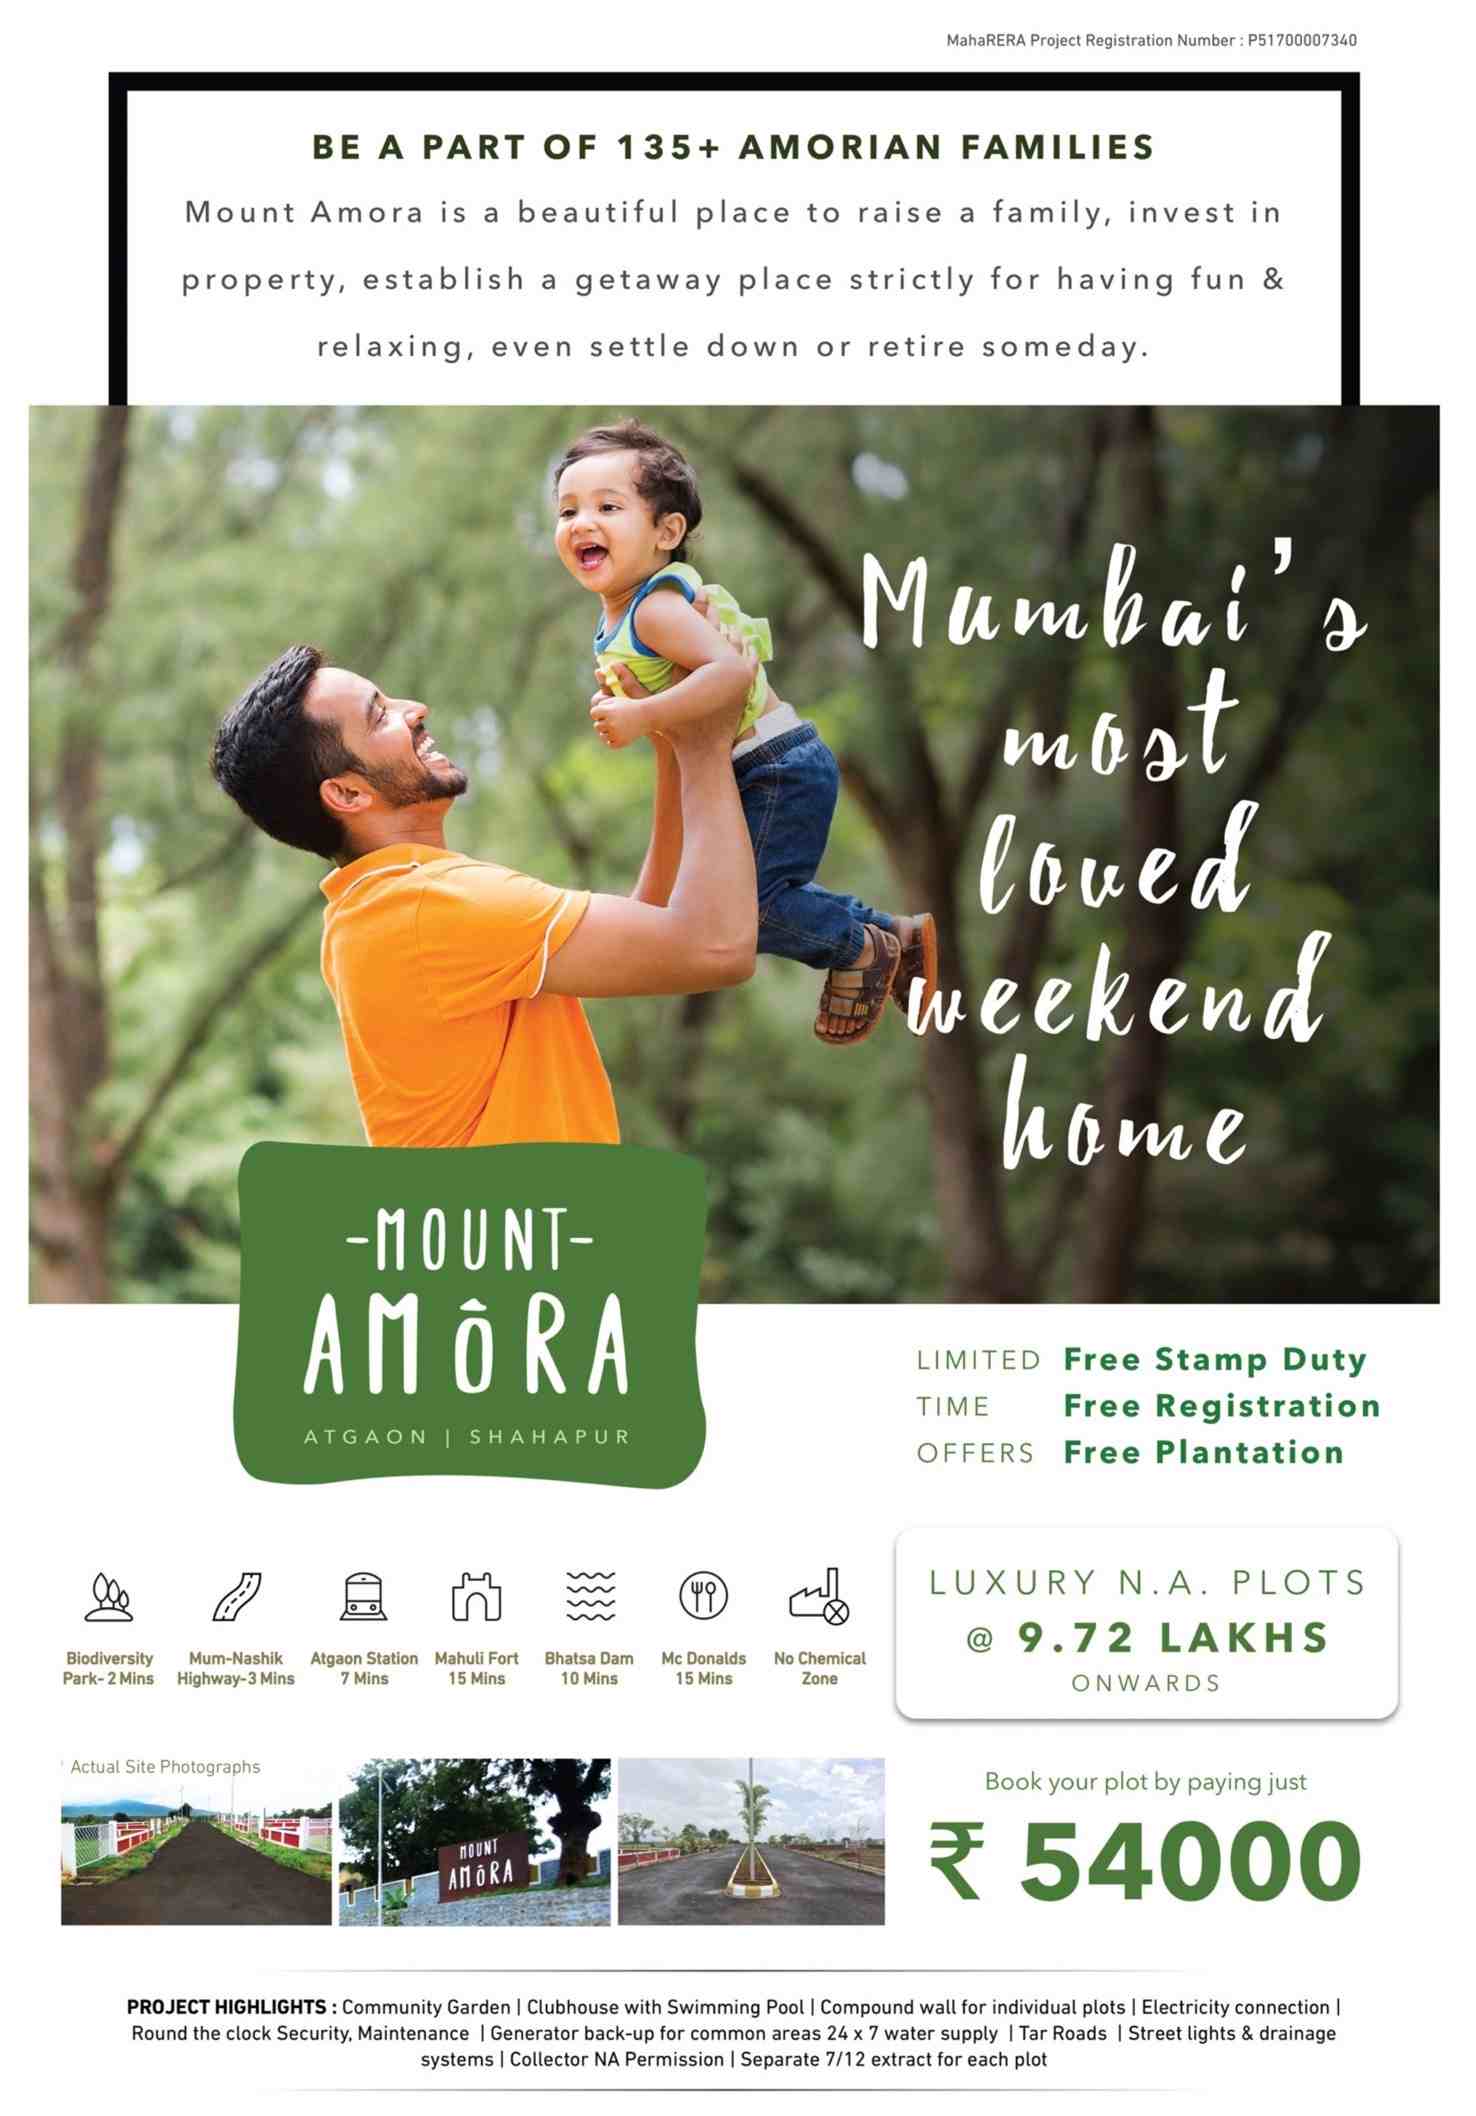 Live in Mumbai's most loved weekend home at Wings Mount Amora Update